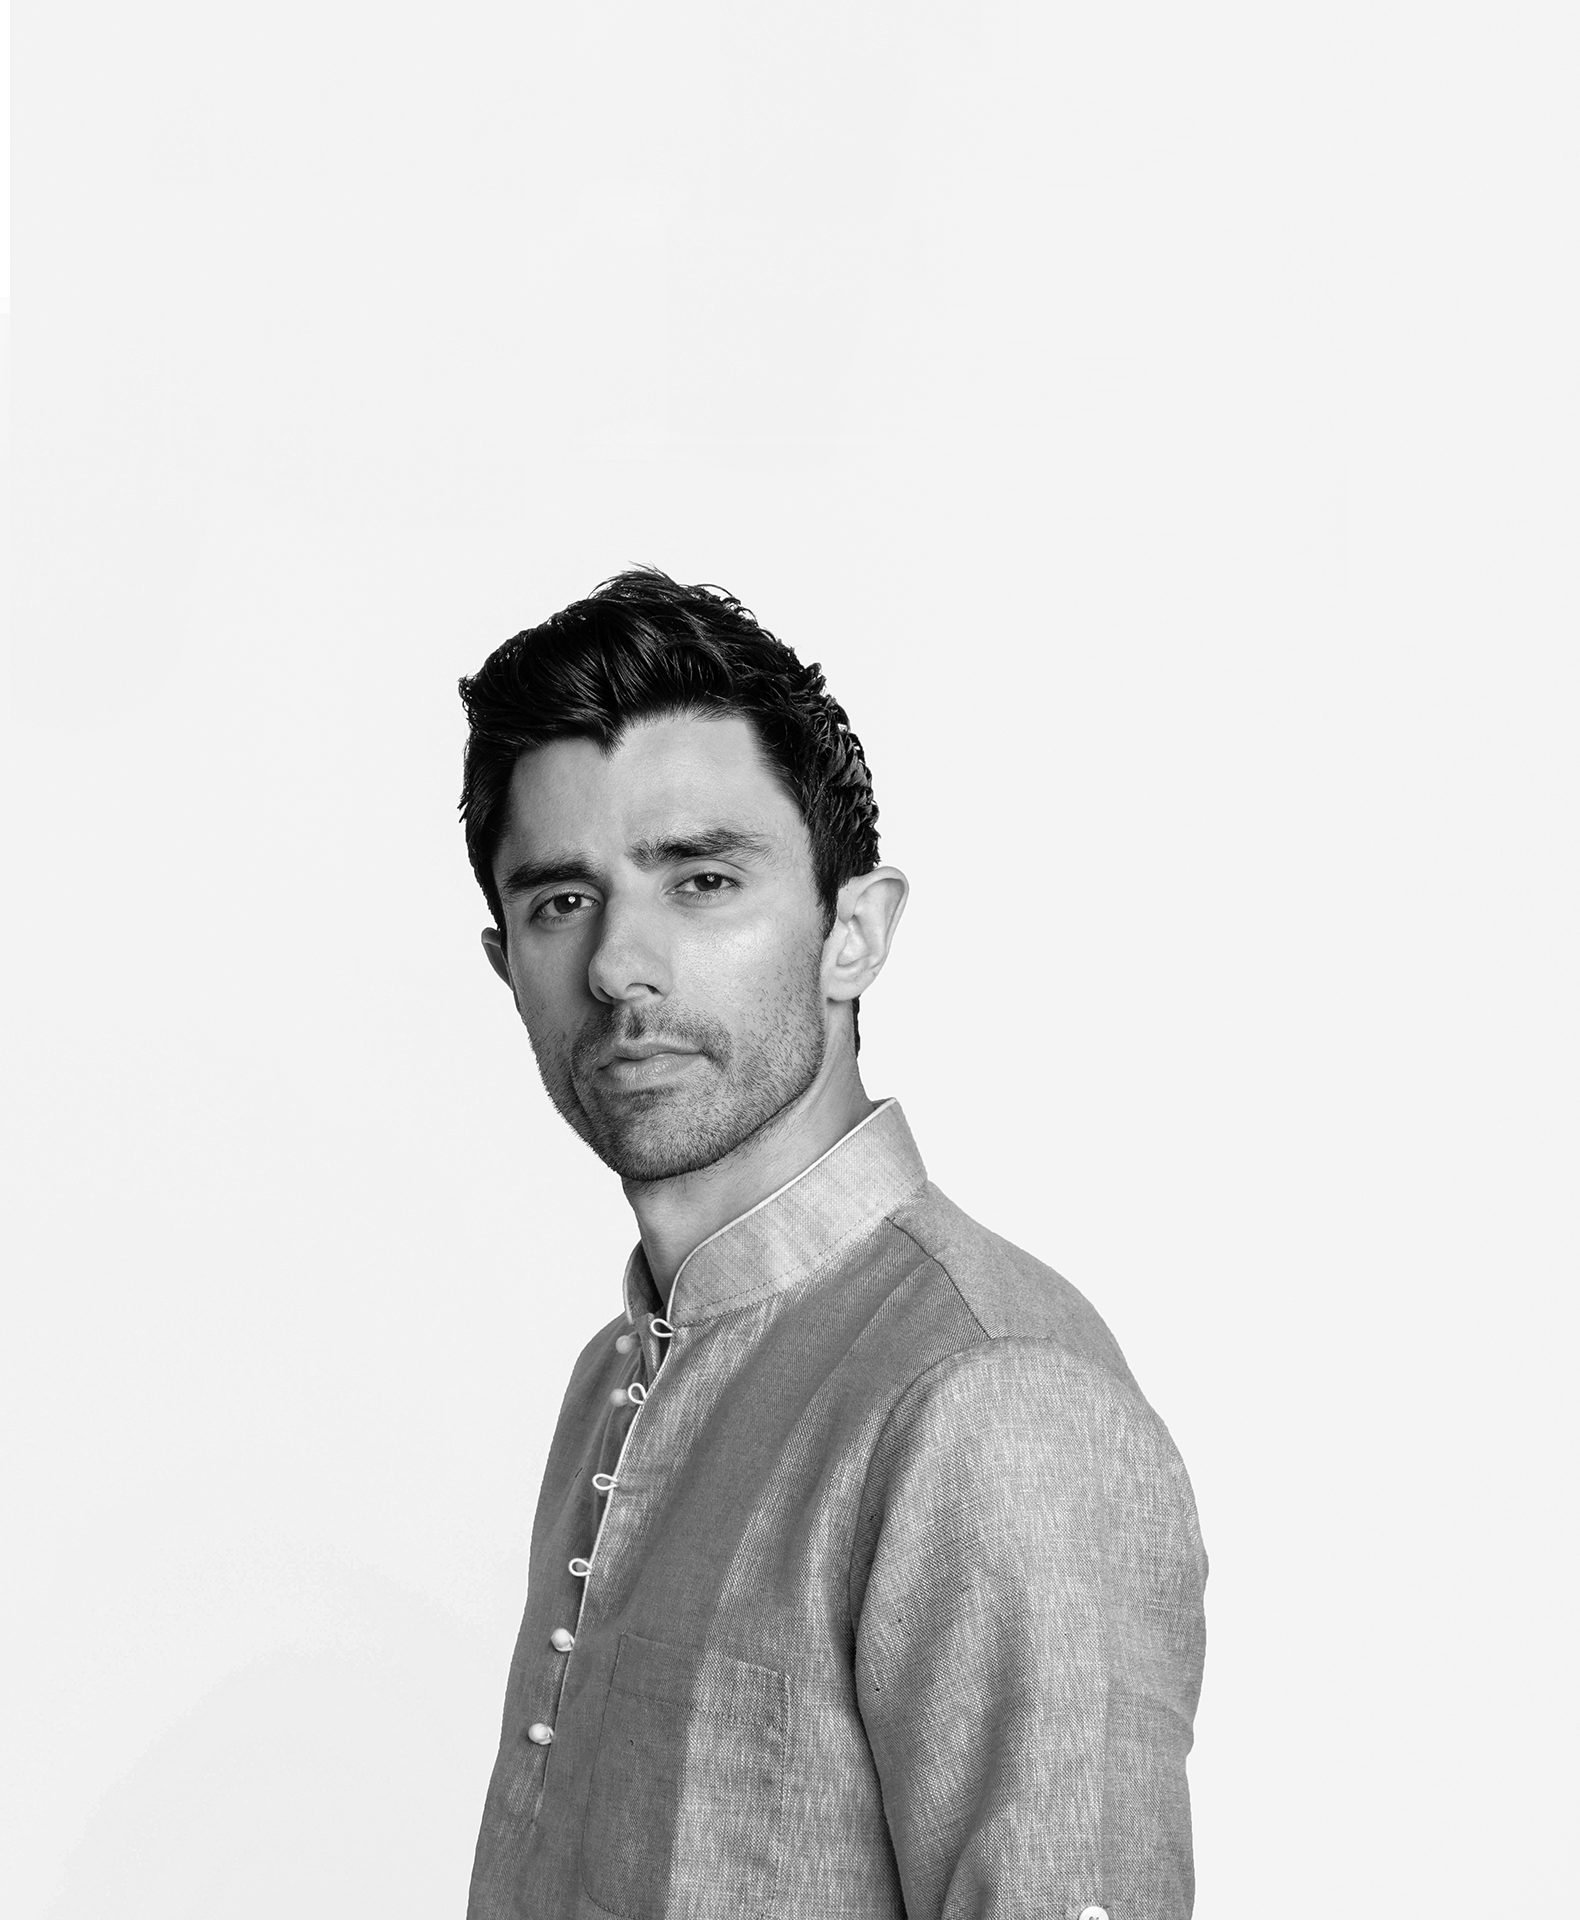 kshmr all about music